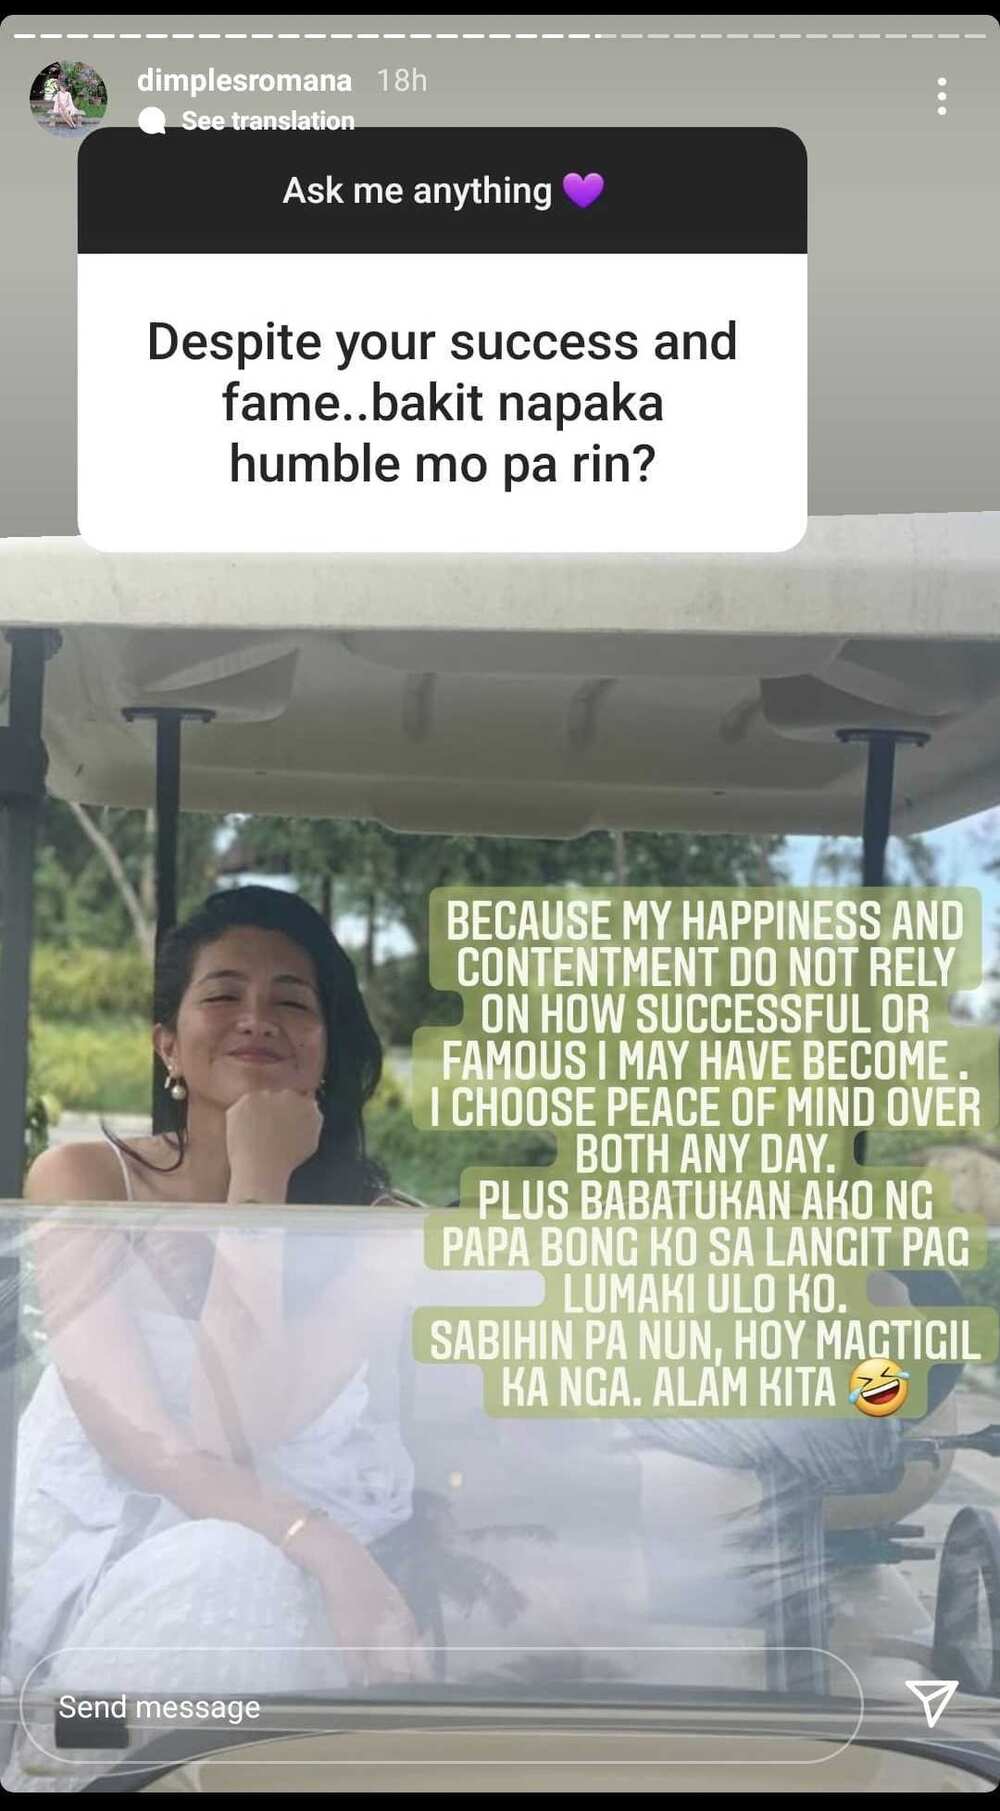 Dimples Romana on why she remains humble despite fame: "I choose peace of mind"